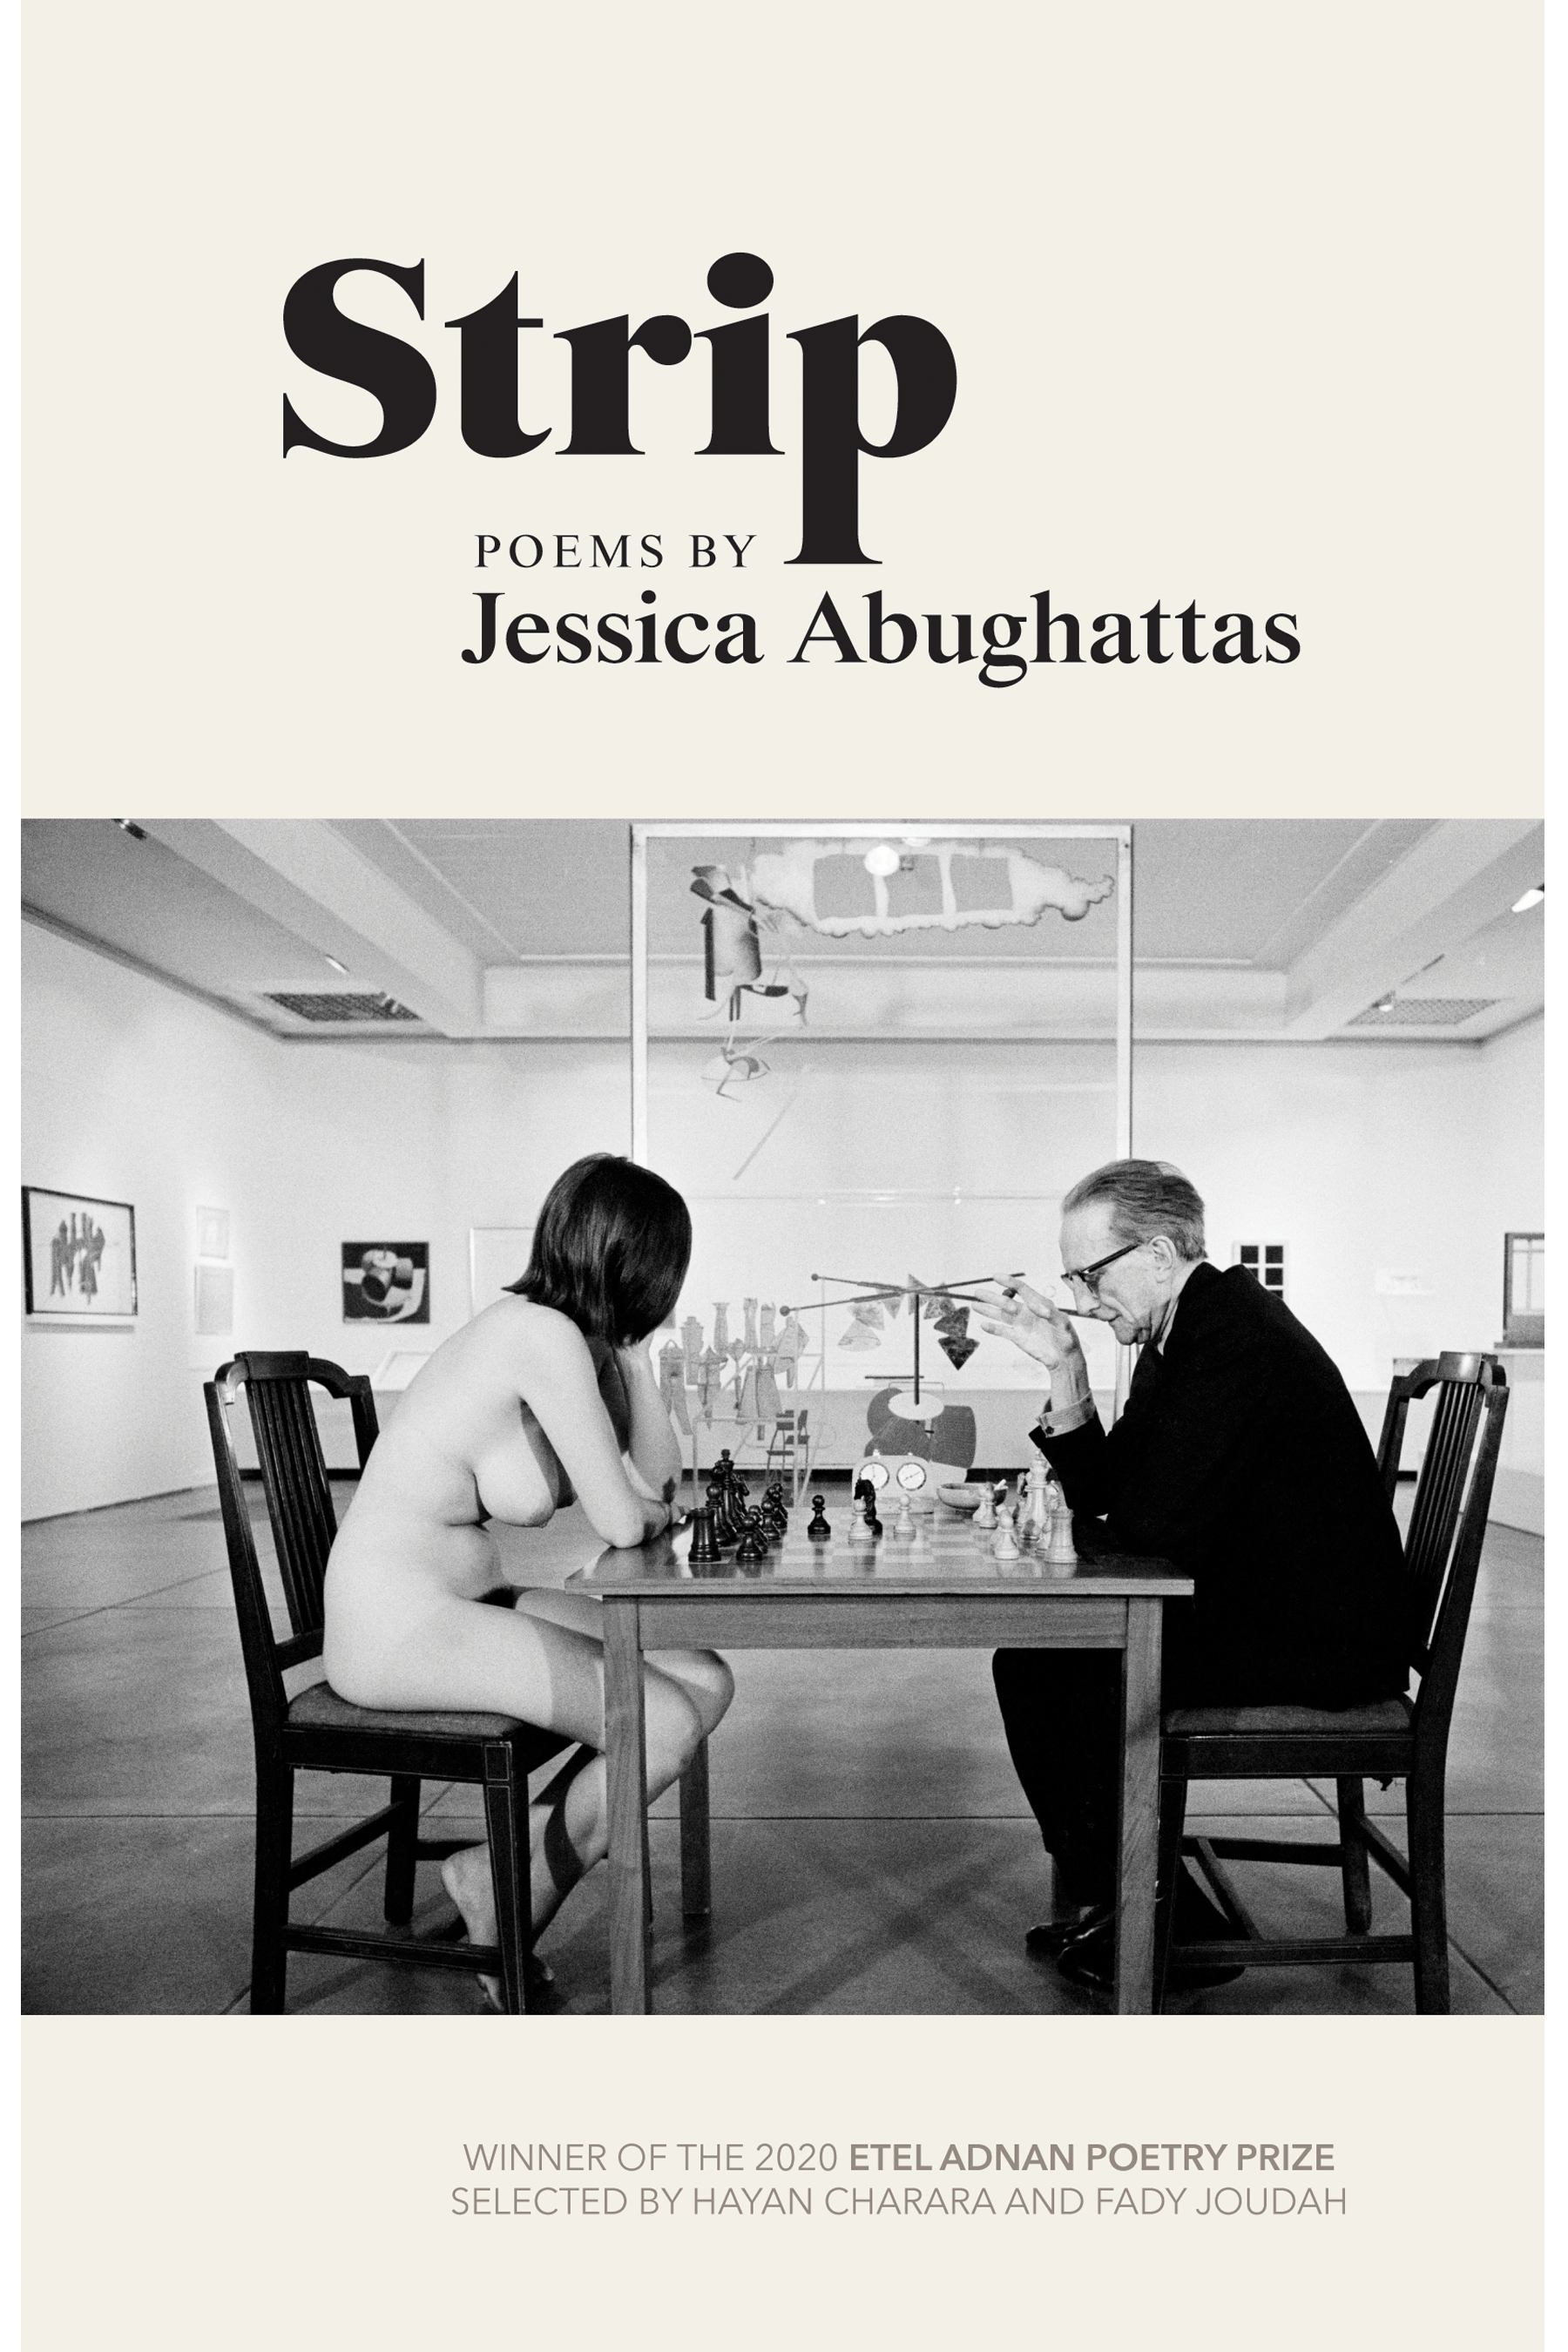 cover image for Strip by Jessica Abughattas